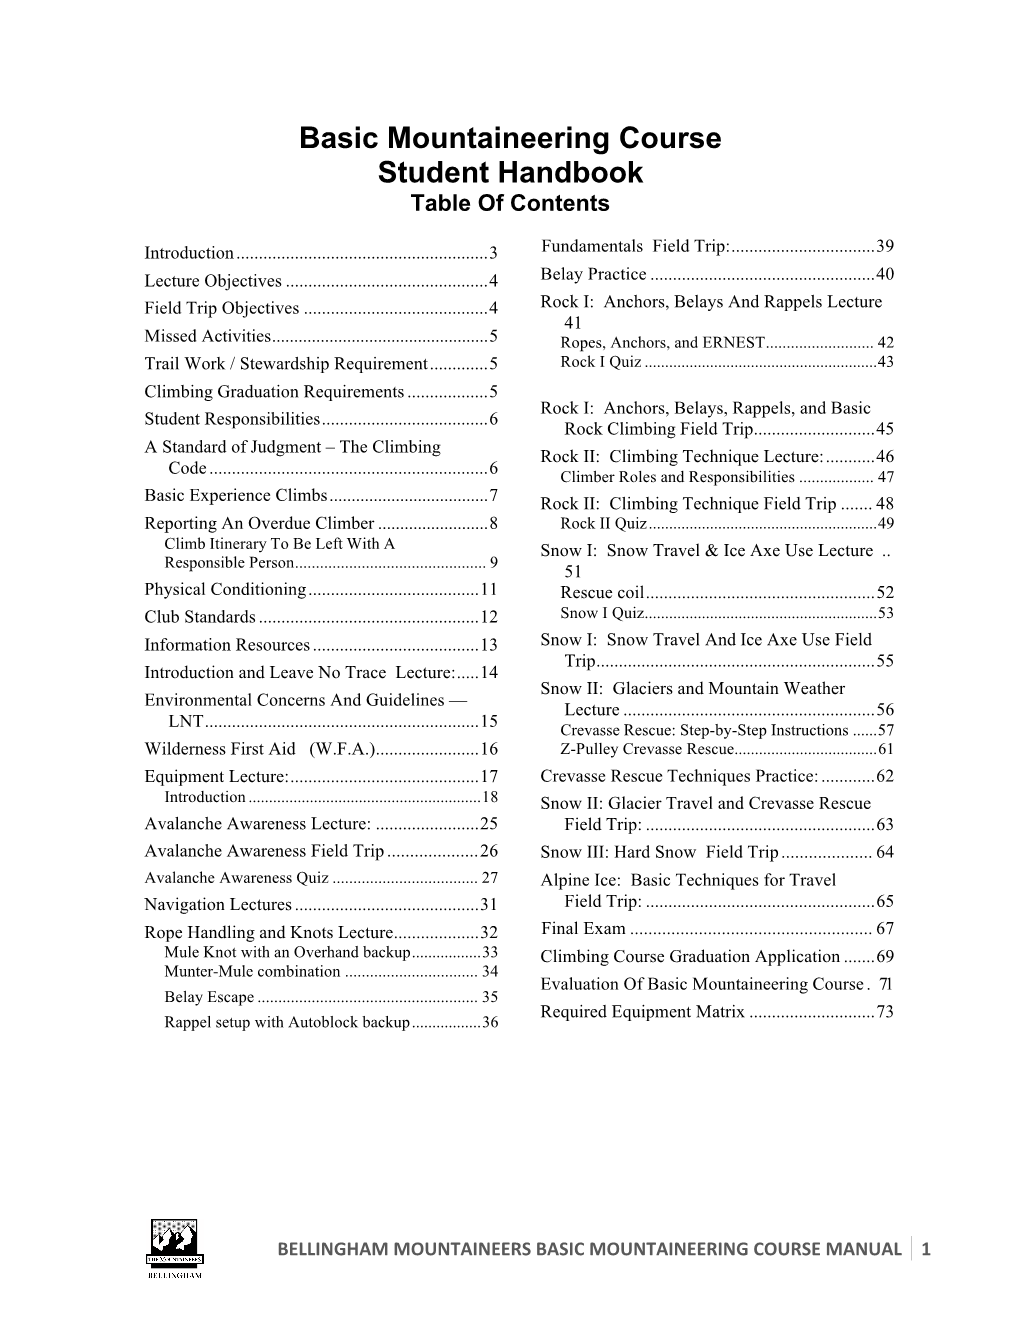 Basic Mountaineering Course Student Handbook Table of Contents